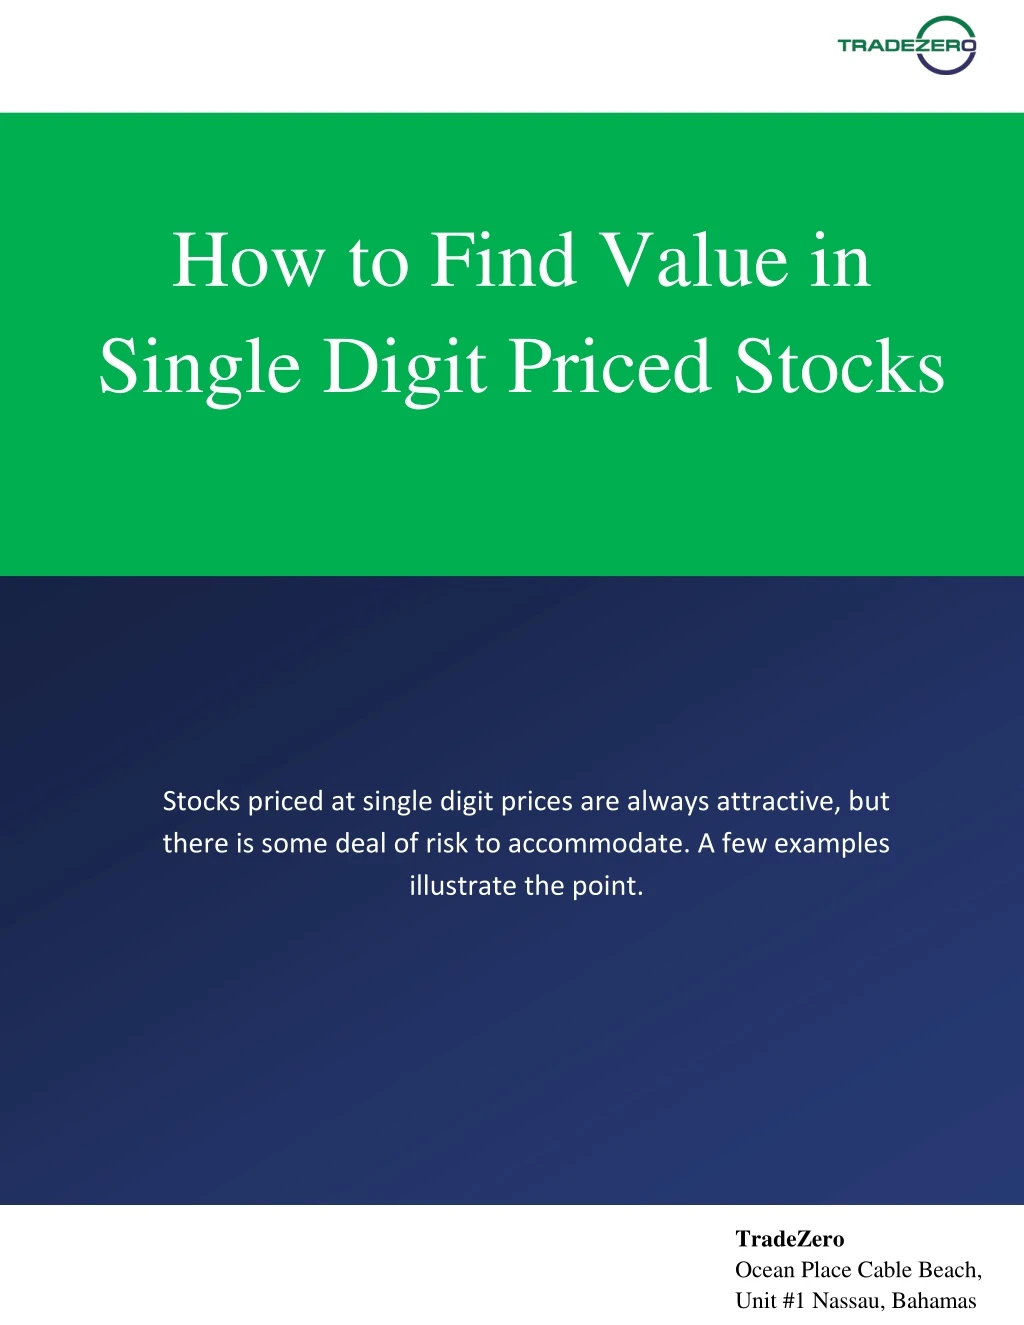 how to find value in single digit priced stocks